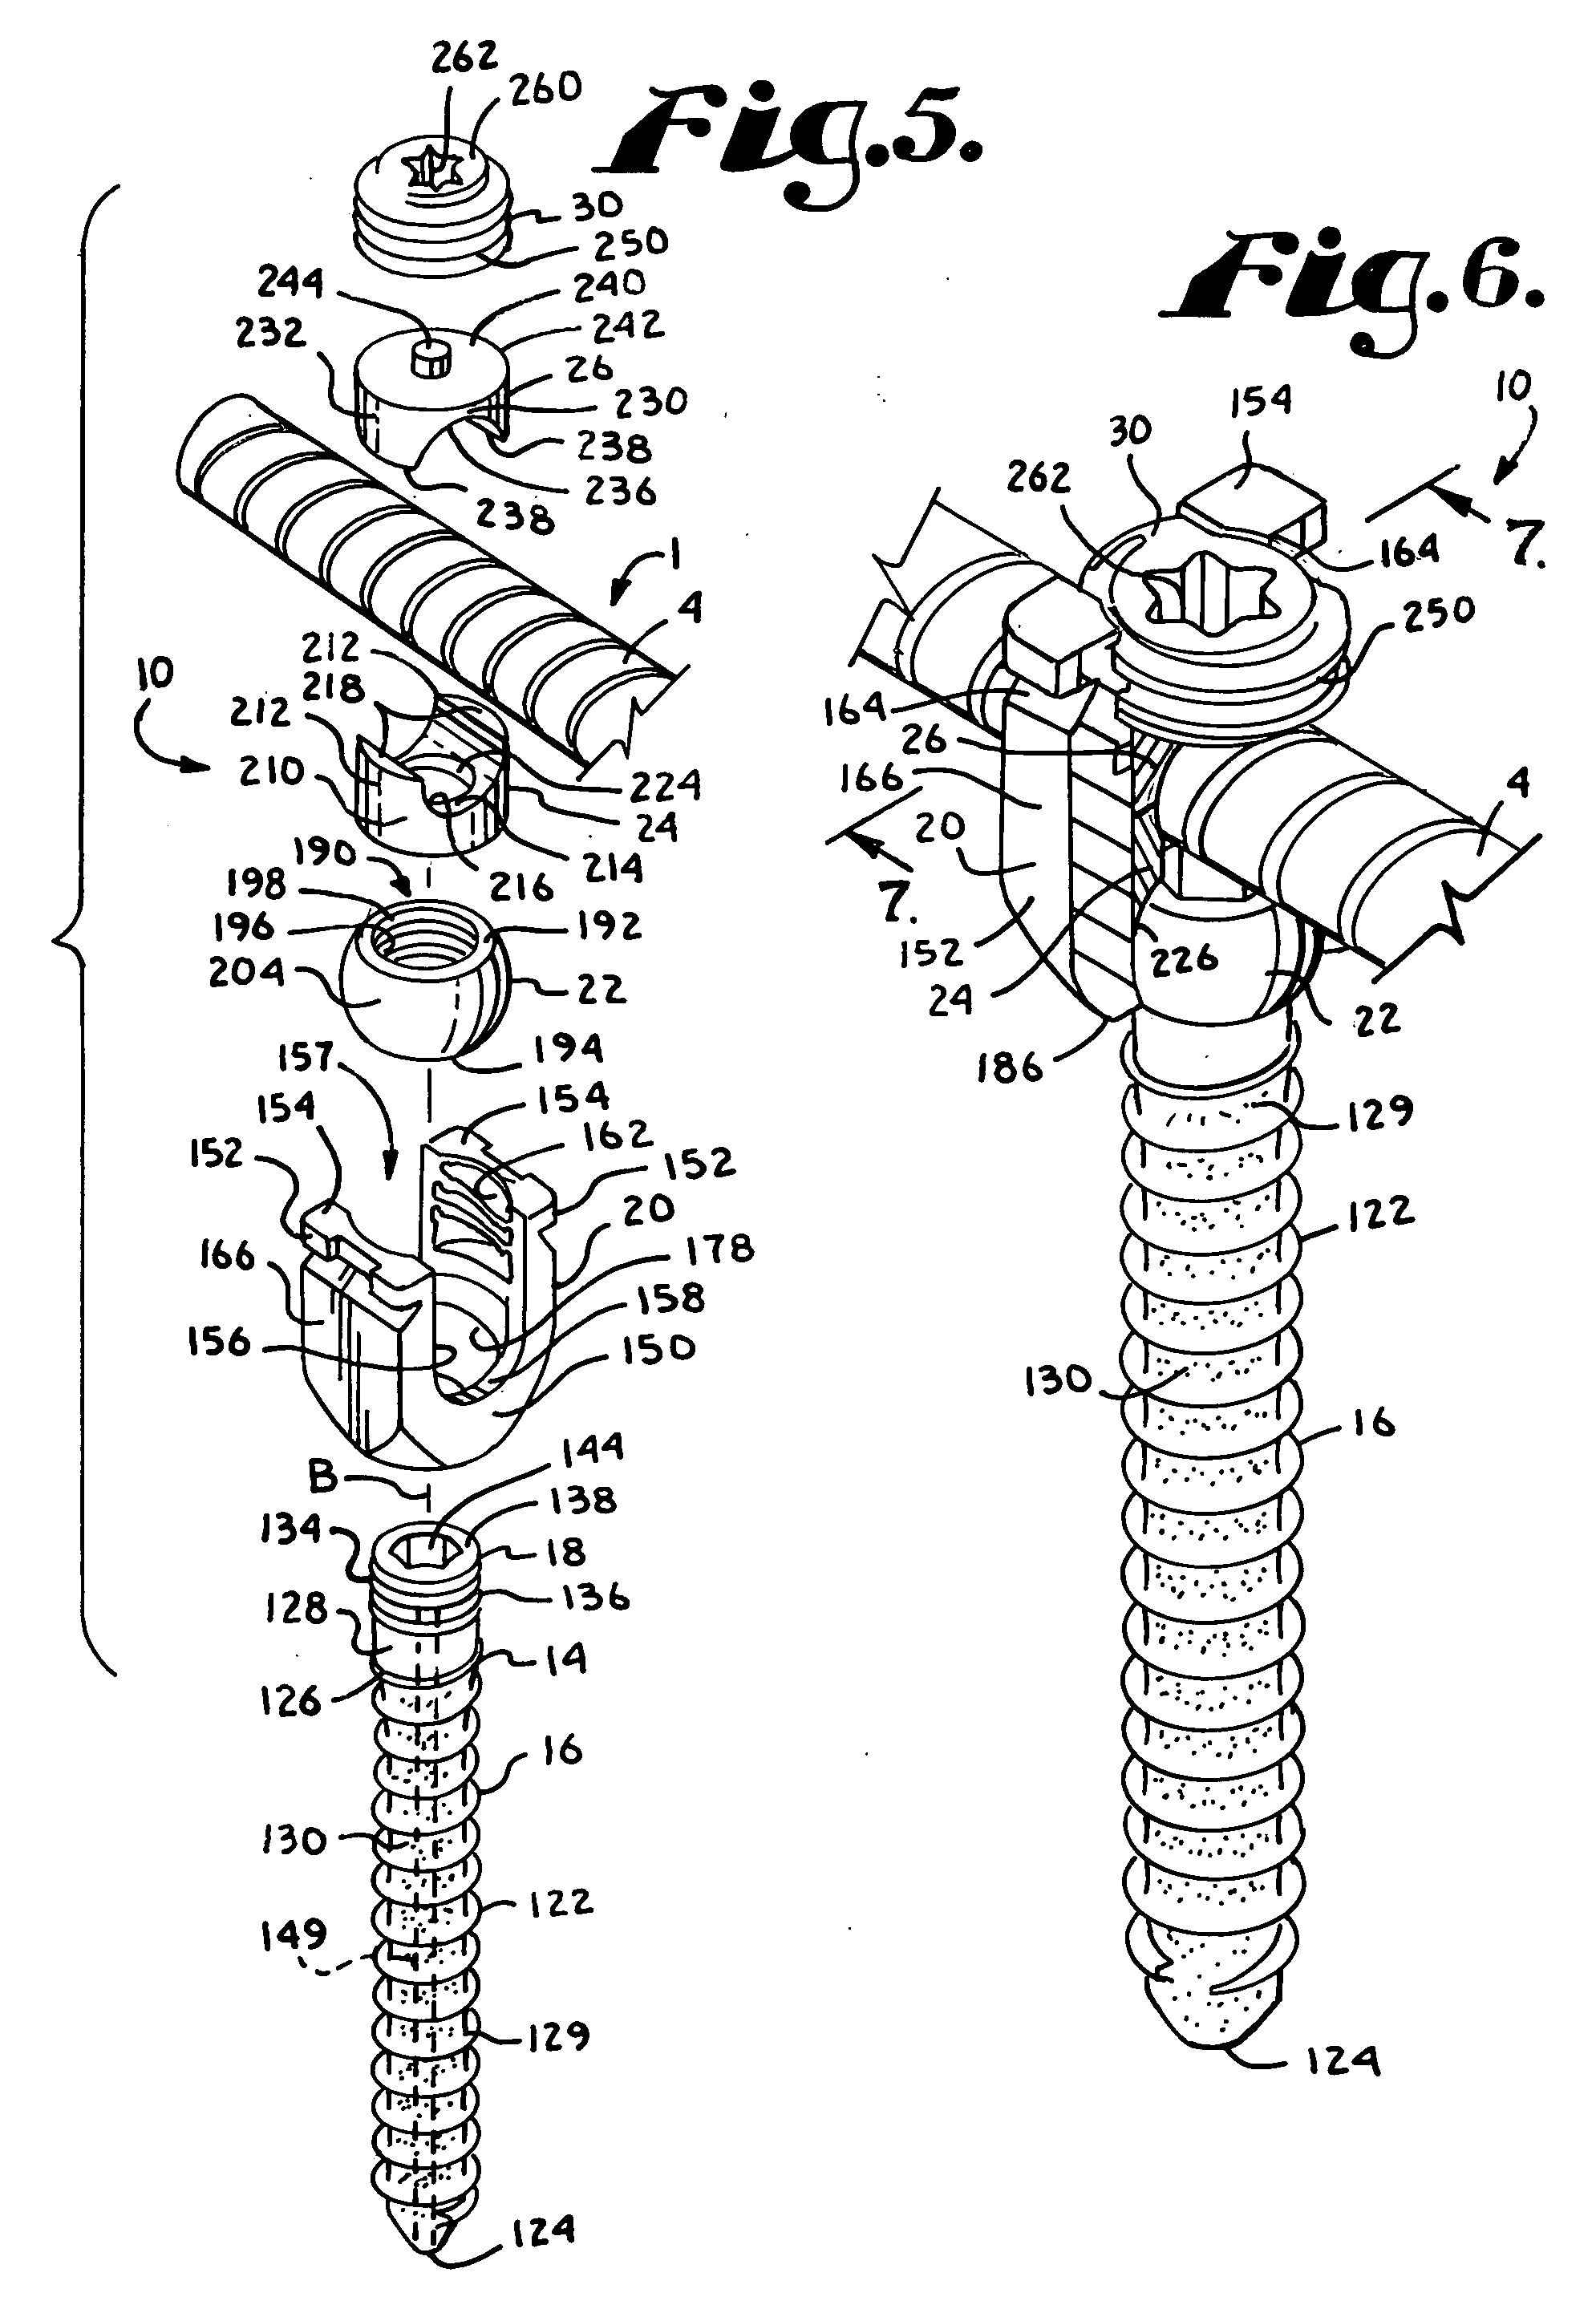 Dynamic fixation assemblies with inner core and outer coil-like member